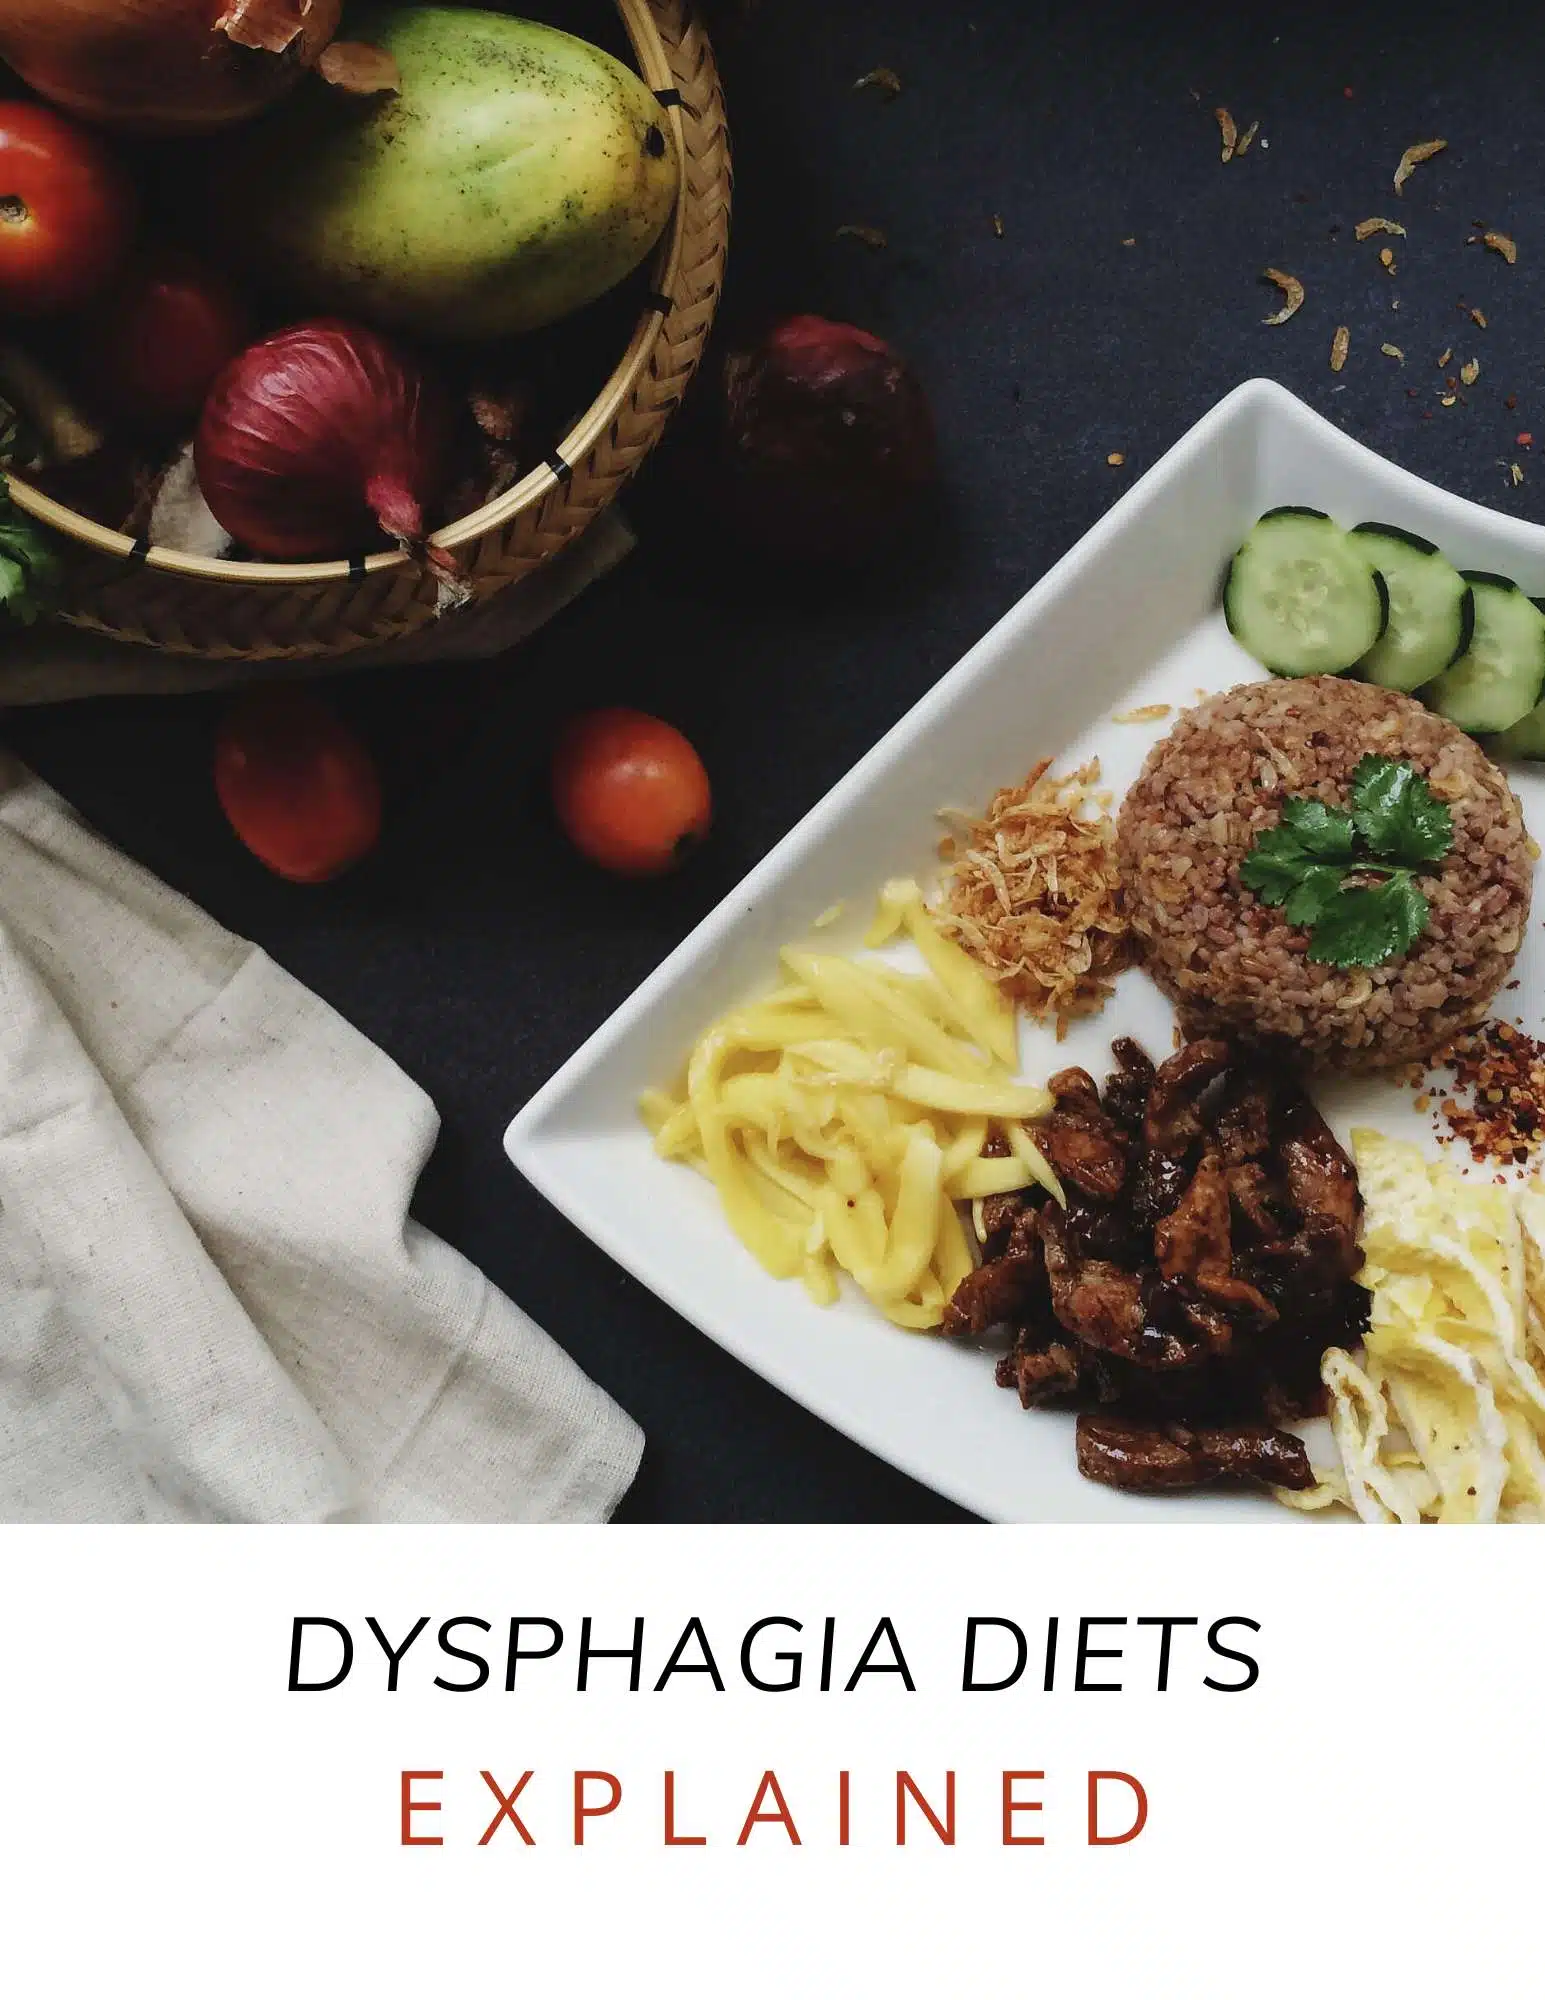 Foods of different textures on a white plate on a table with a white napkin with text saying dysphagia diets explained.